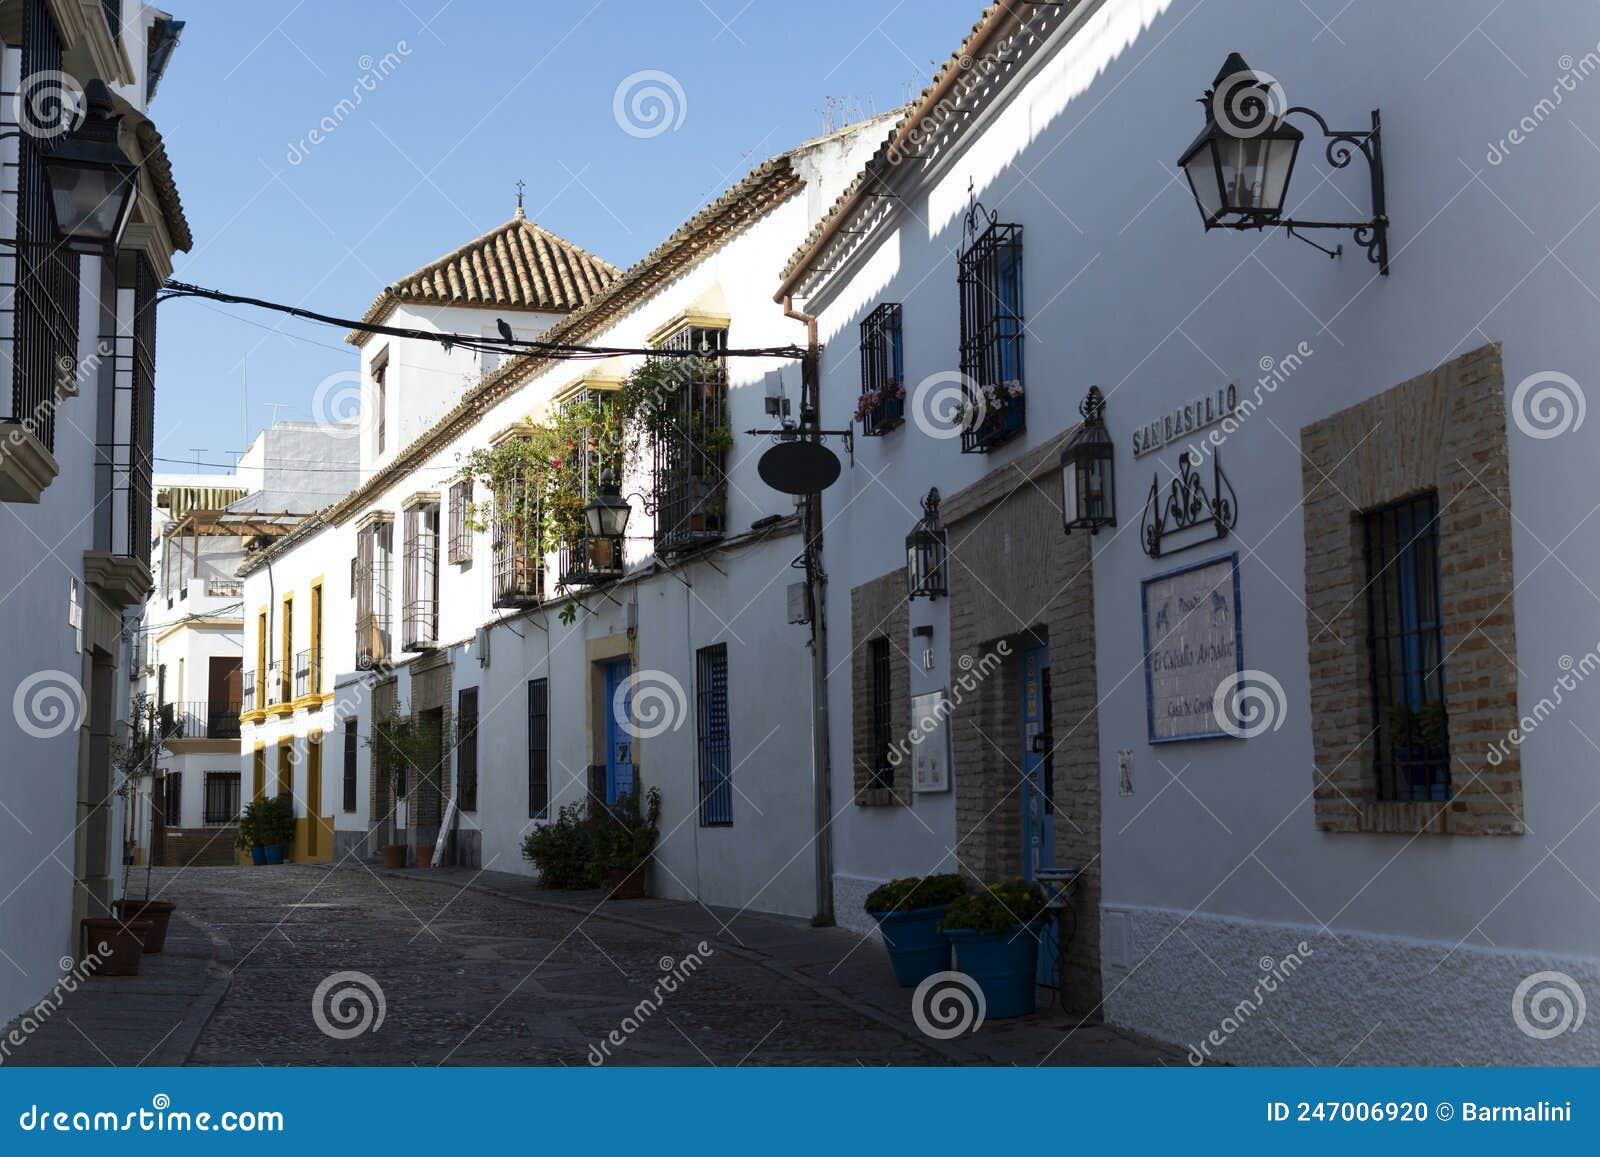 view on old part of cordoba, san basilio quarter with white houses and flowers pots